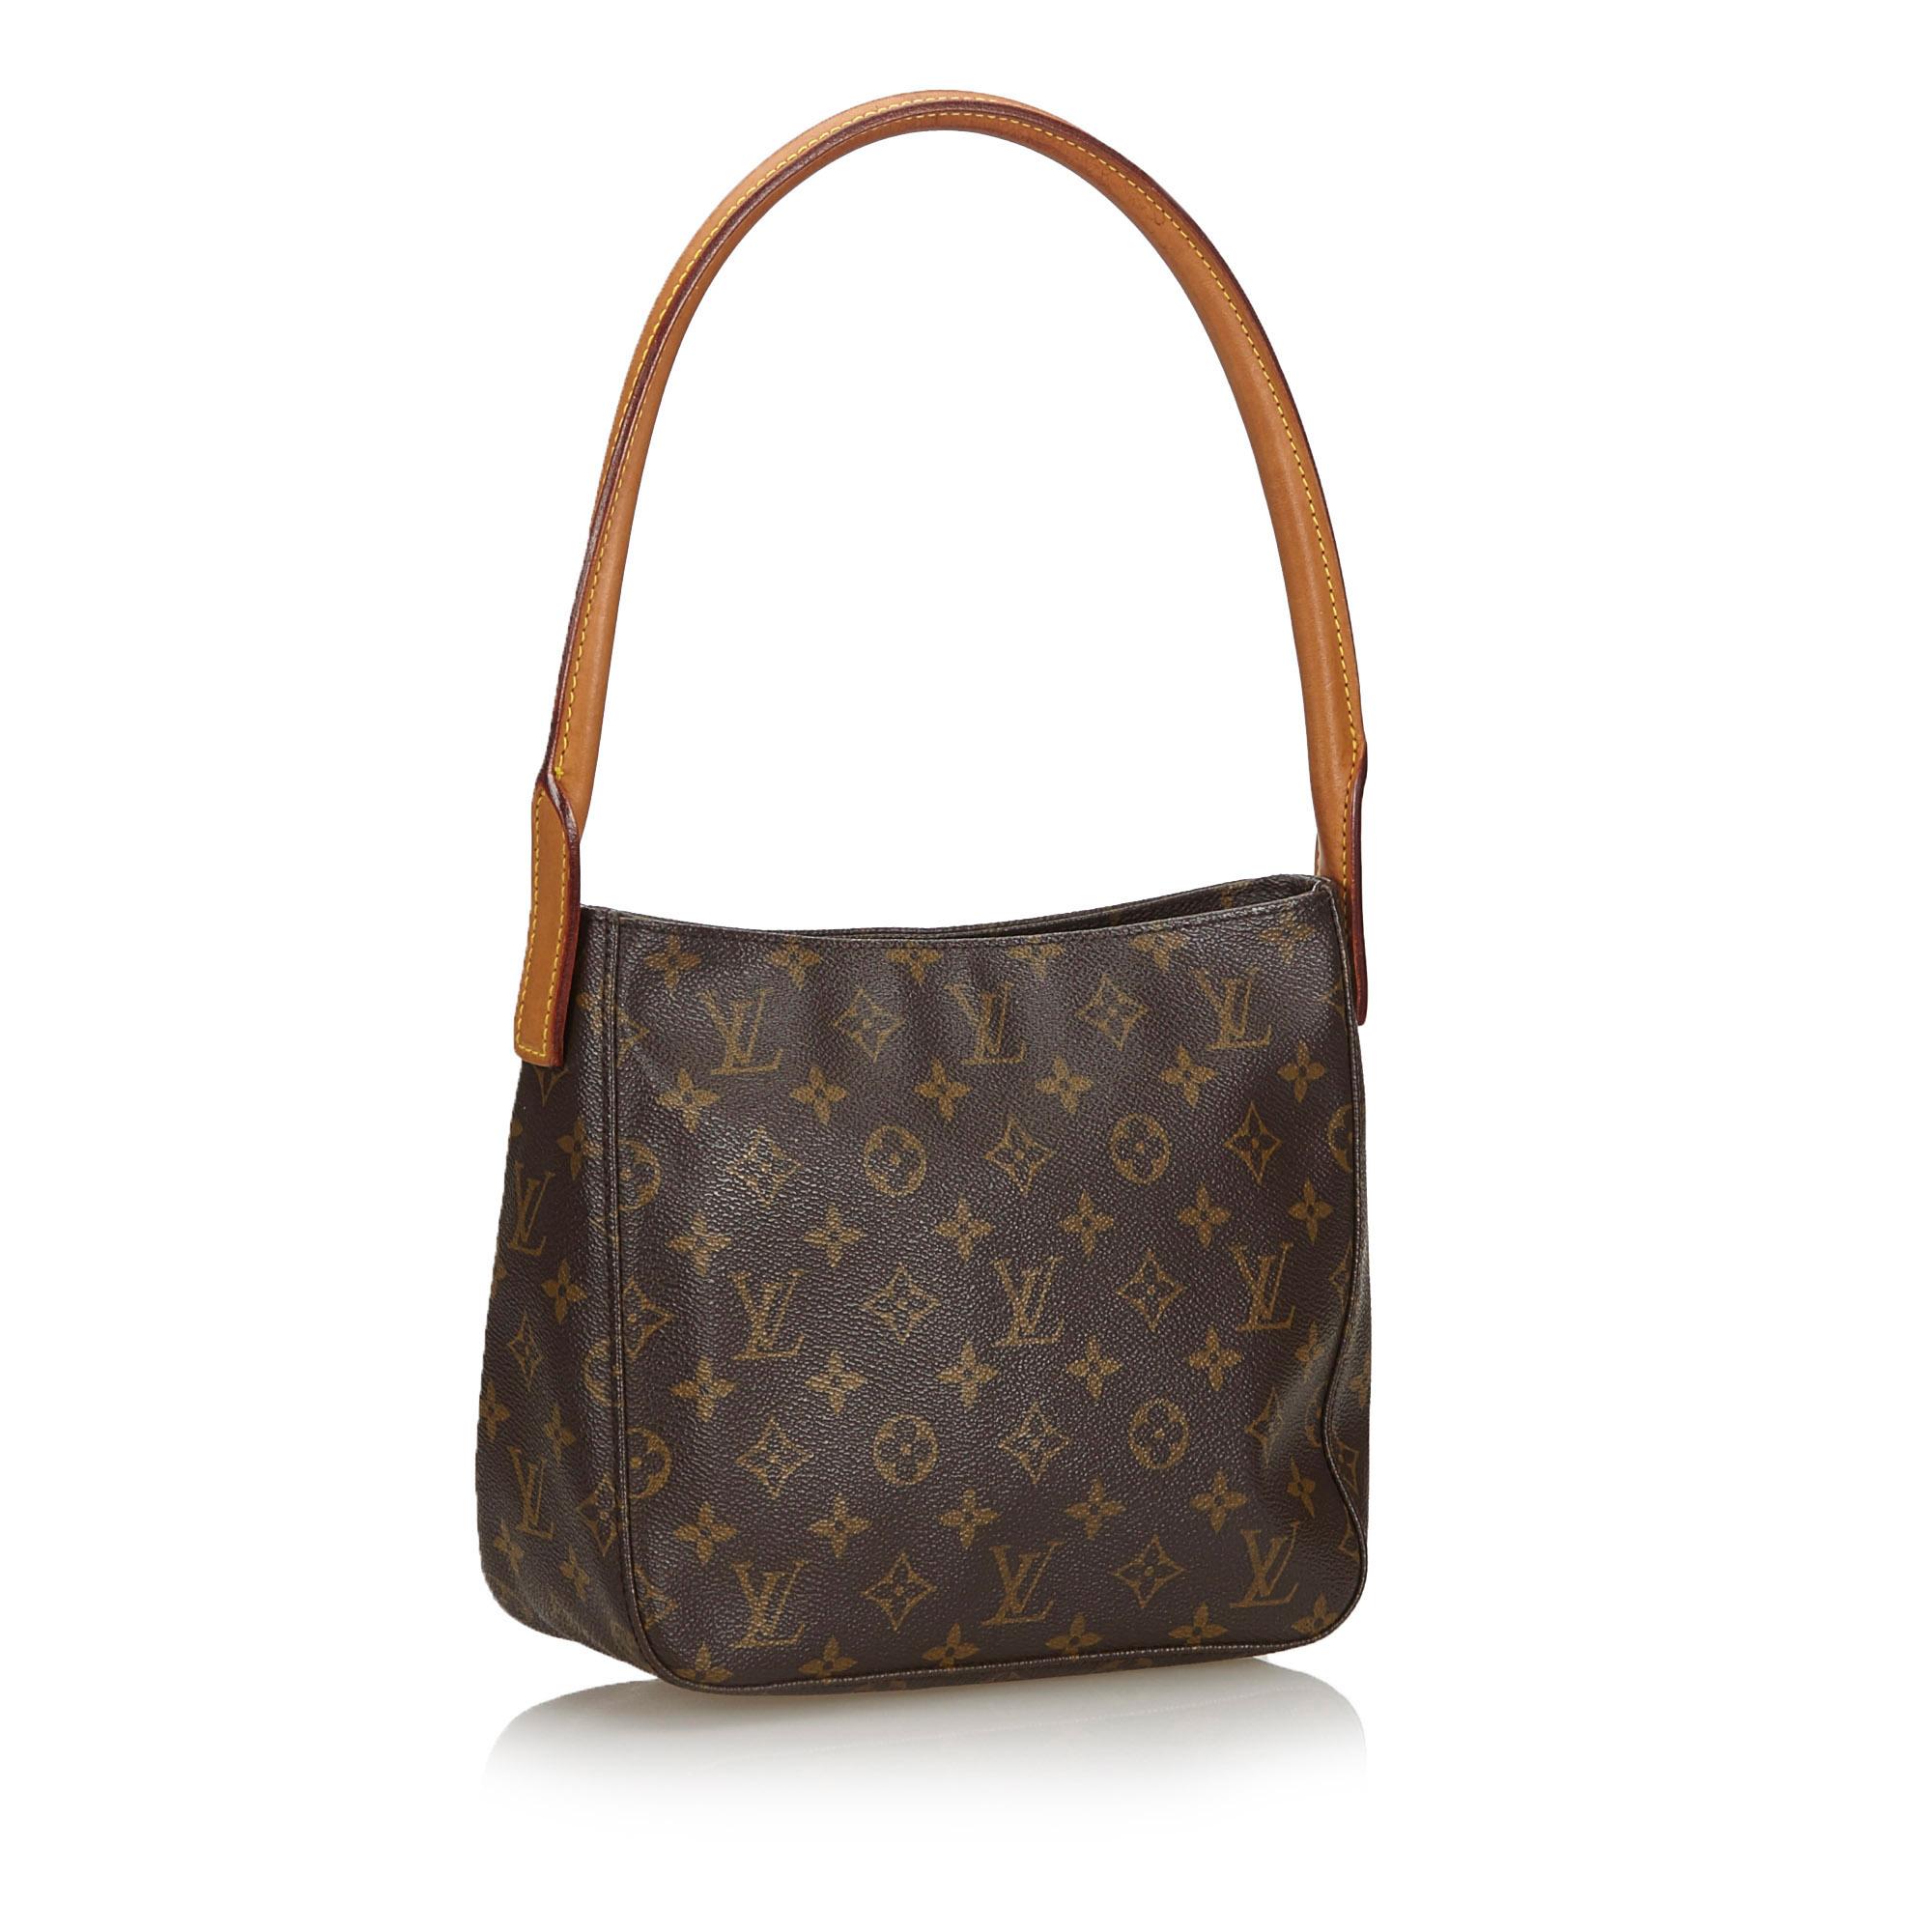 The Looping MM features a monogram canvas body, a rolled shoulder strap, a top zip closure, and an interior zip pocket. It carries as B+ condition rating.

Inclusions: 
Dust Bag

Louis Vuitton pieces do not come with an authenticity card please